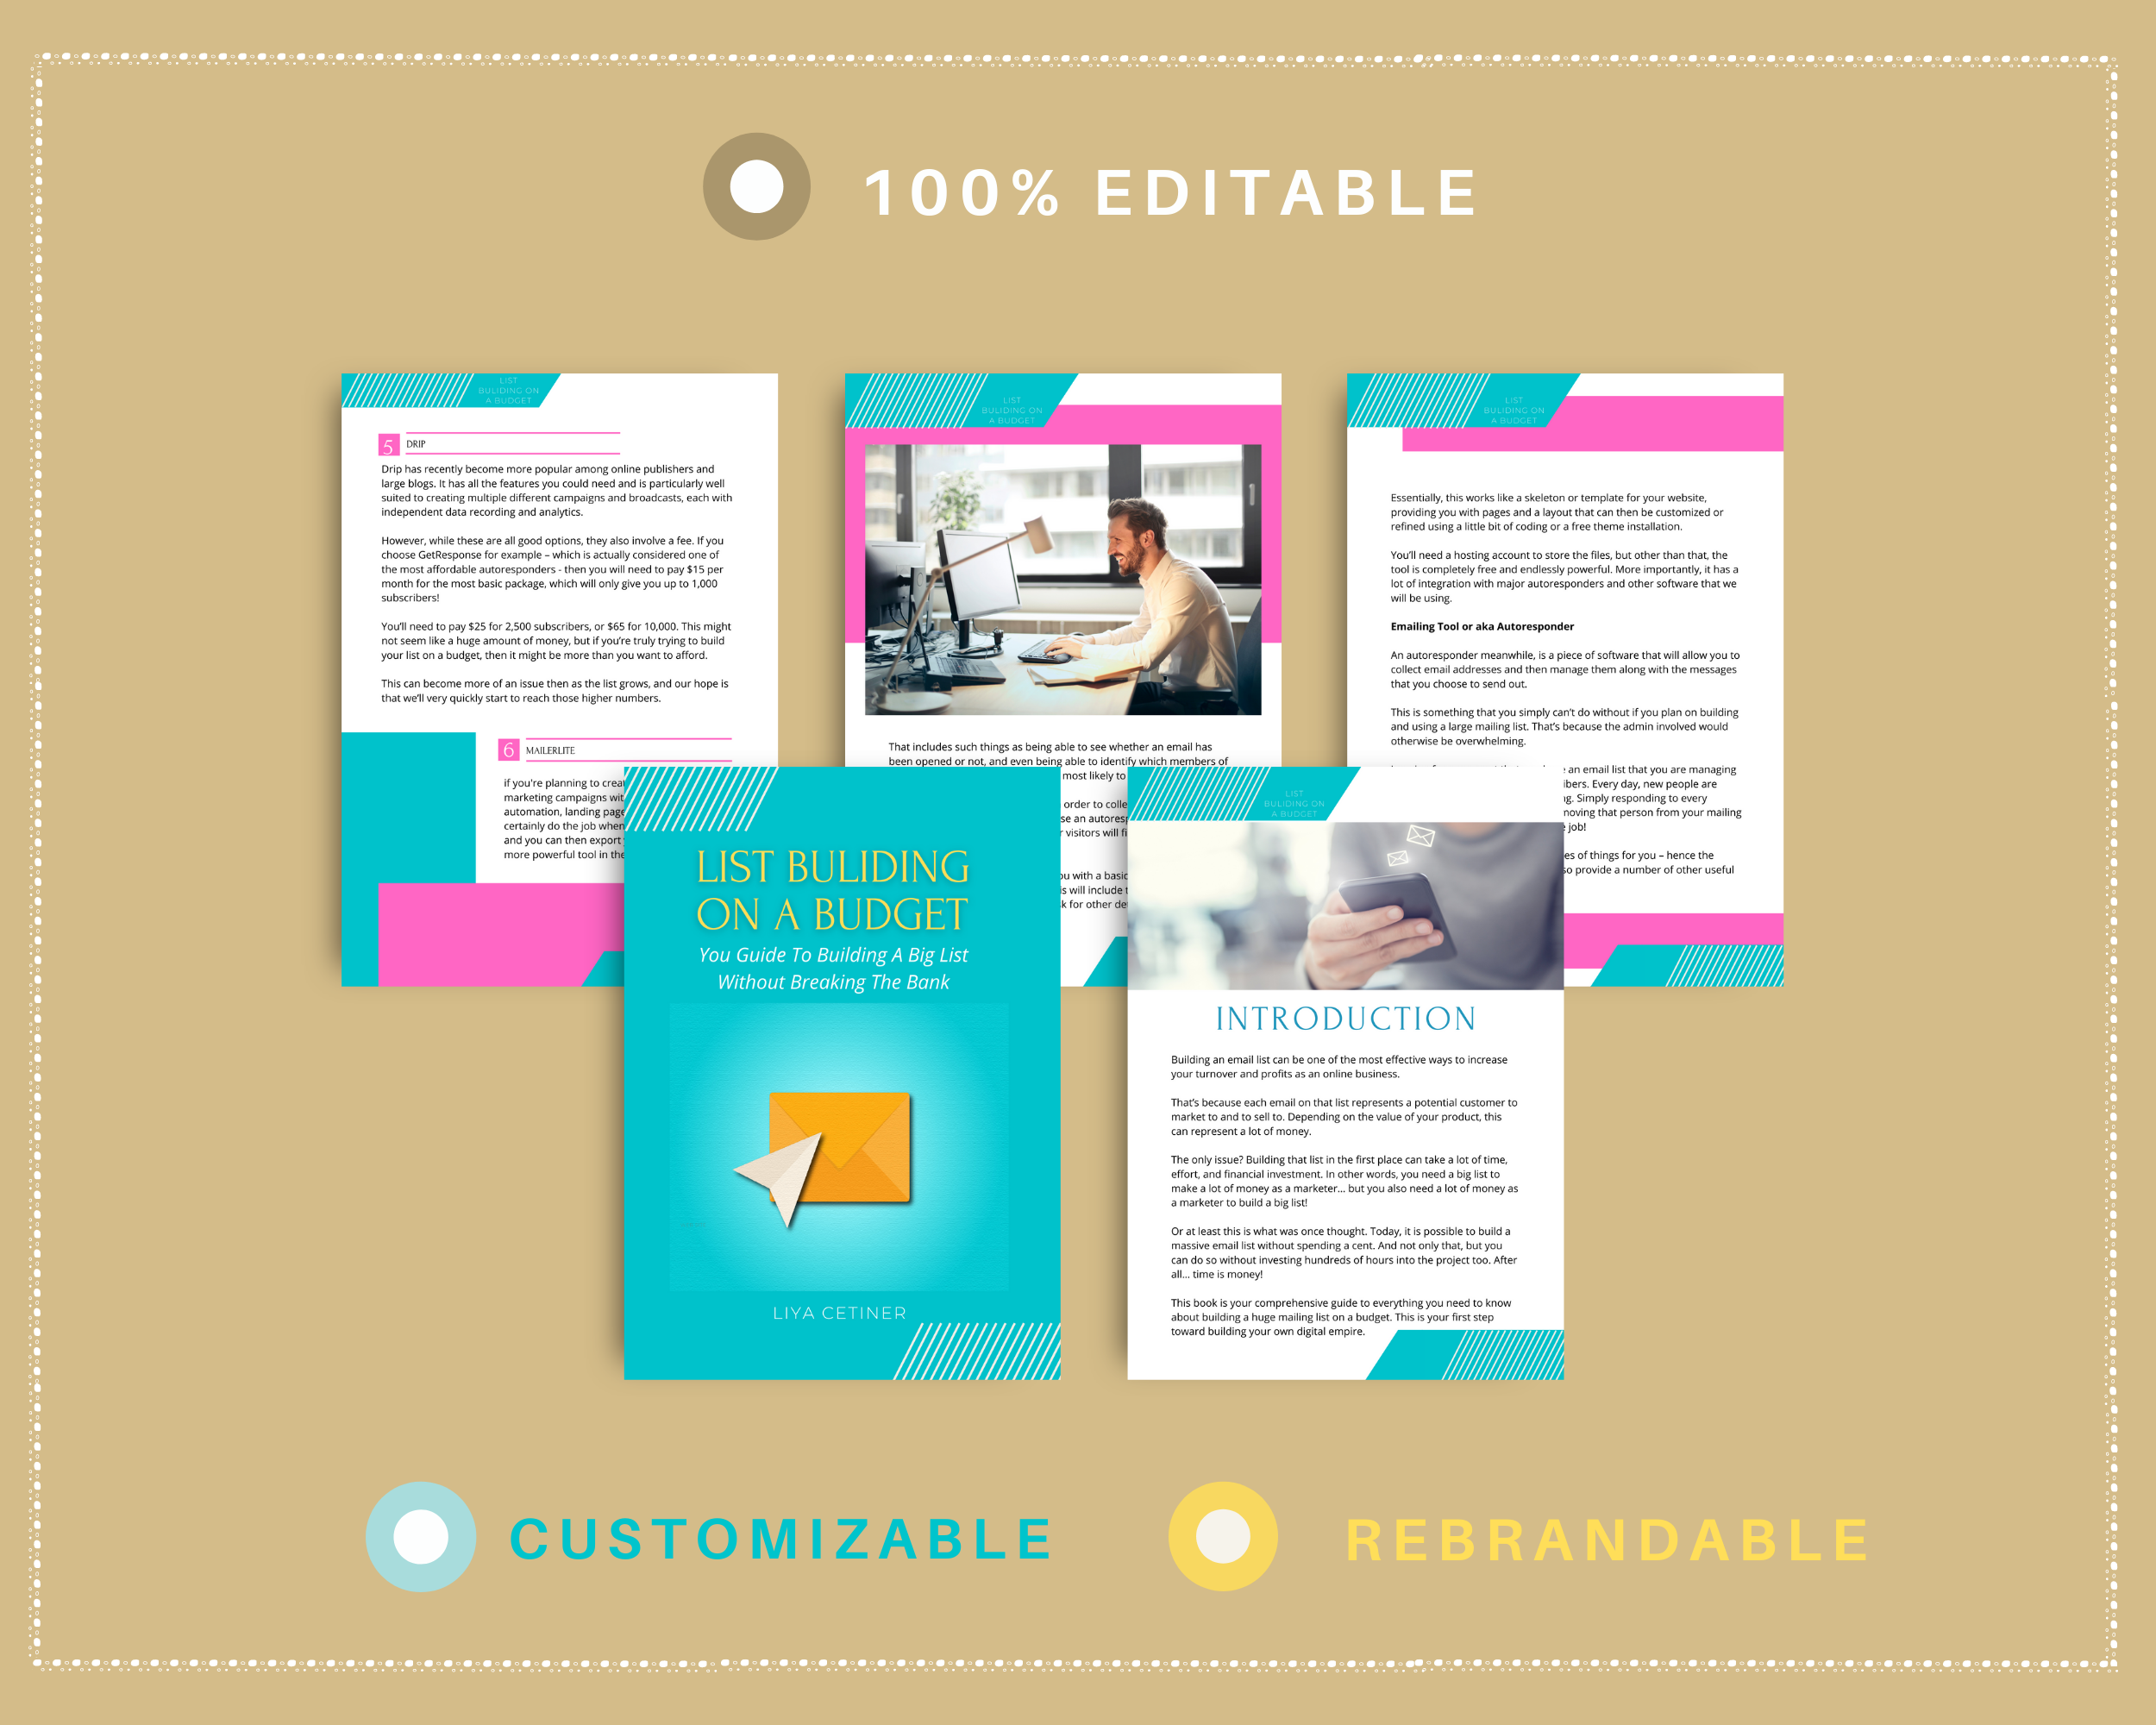 Done for You List Building Playbook in Canva | Editable A4 Size Canva Template